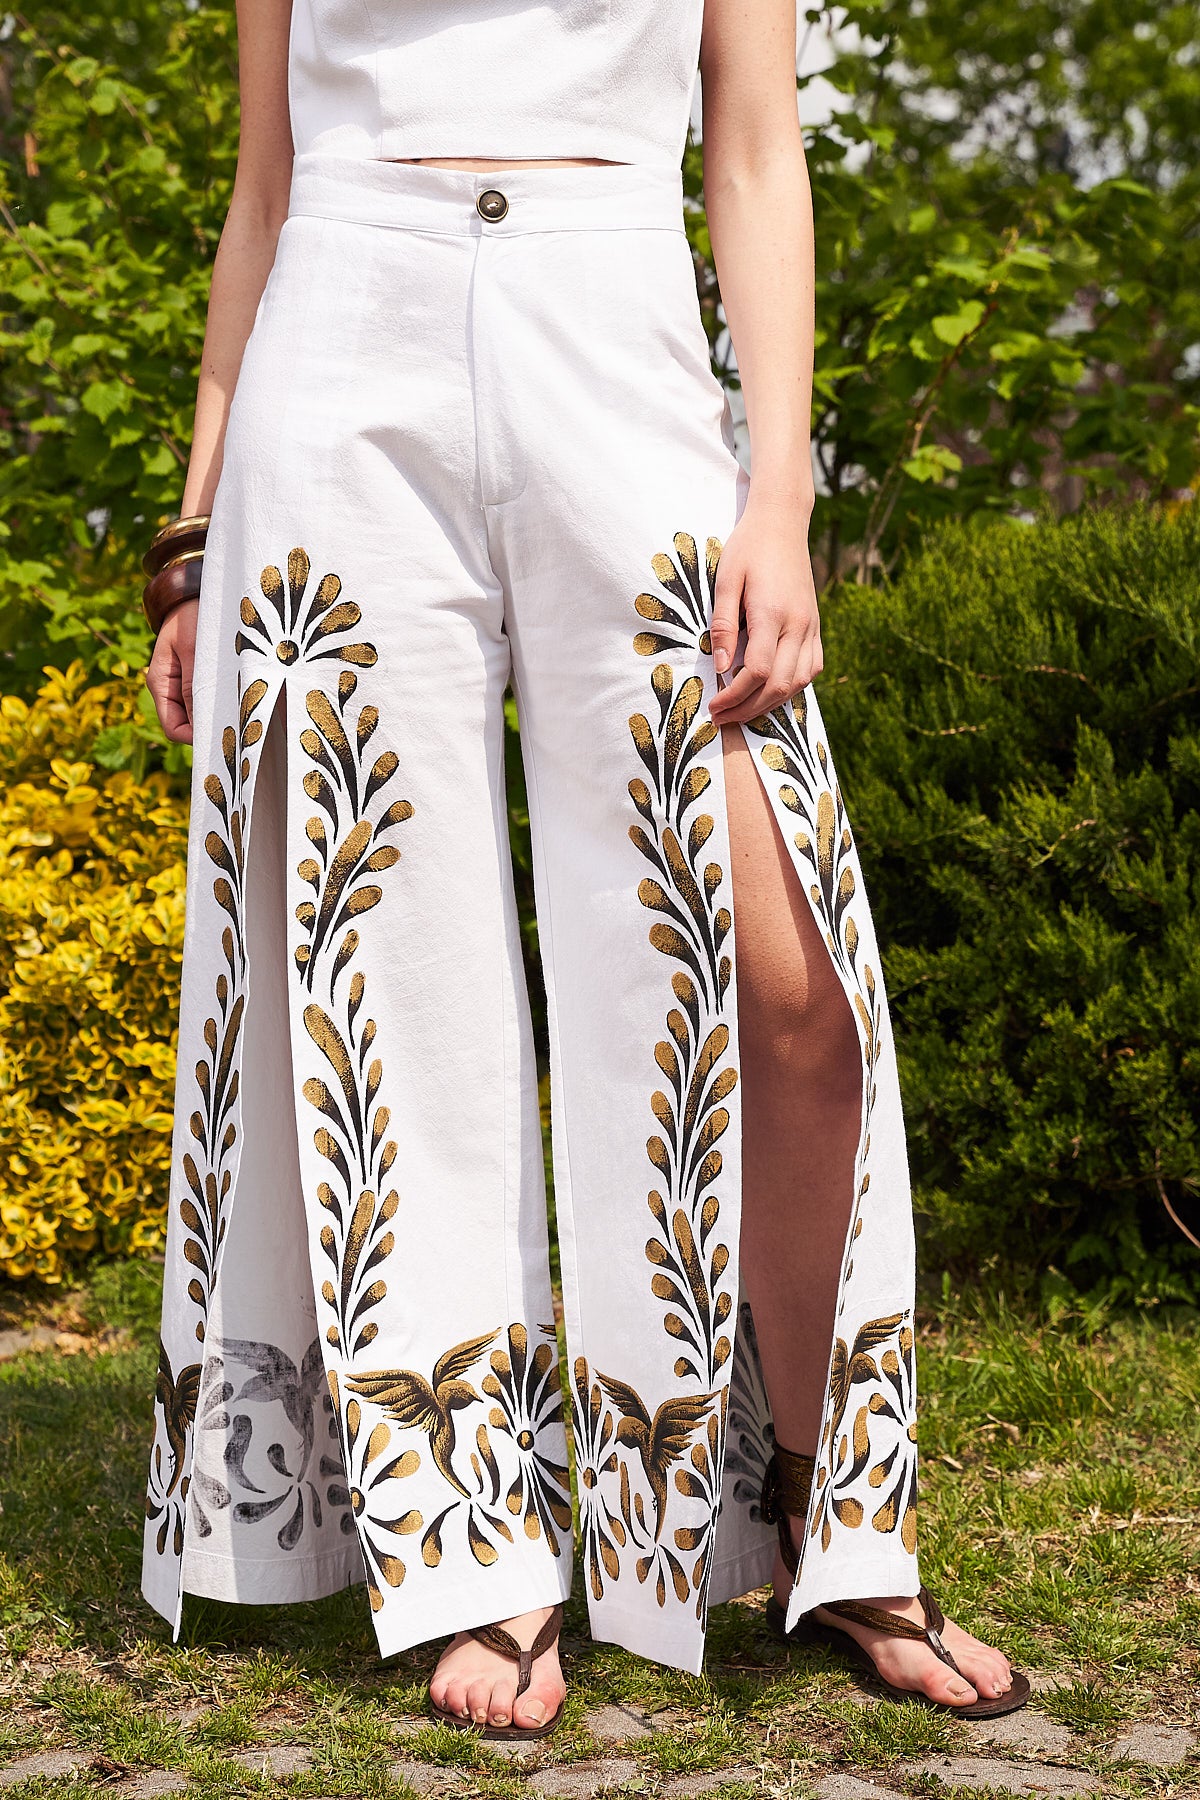 HAND PAINTED PALAZZO PANTS WITH SPLIT ON THE FRONT - TALAVERA ORO ANTIGUO